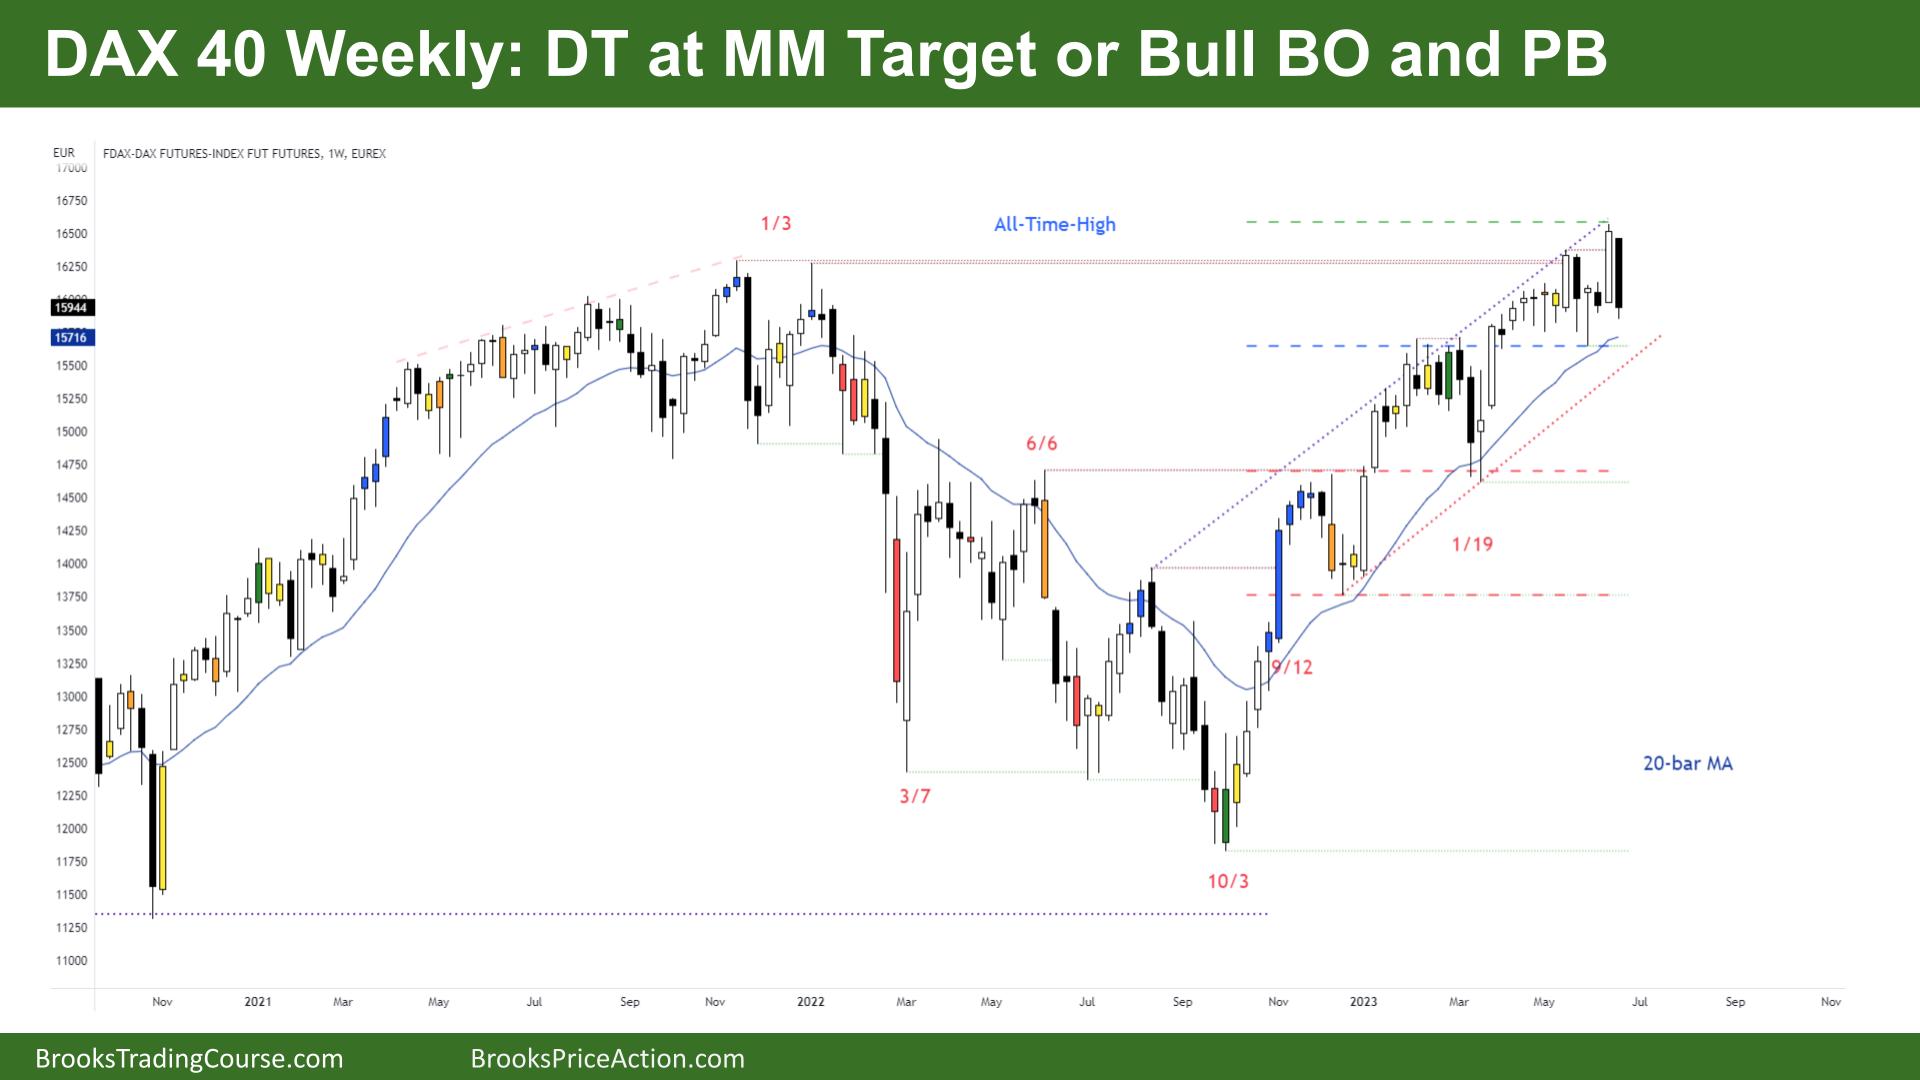 DAX 40 DT at MM Target or Bull BO and PB